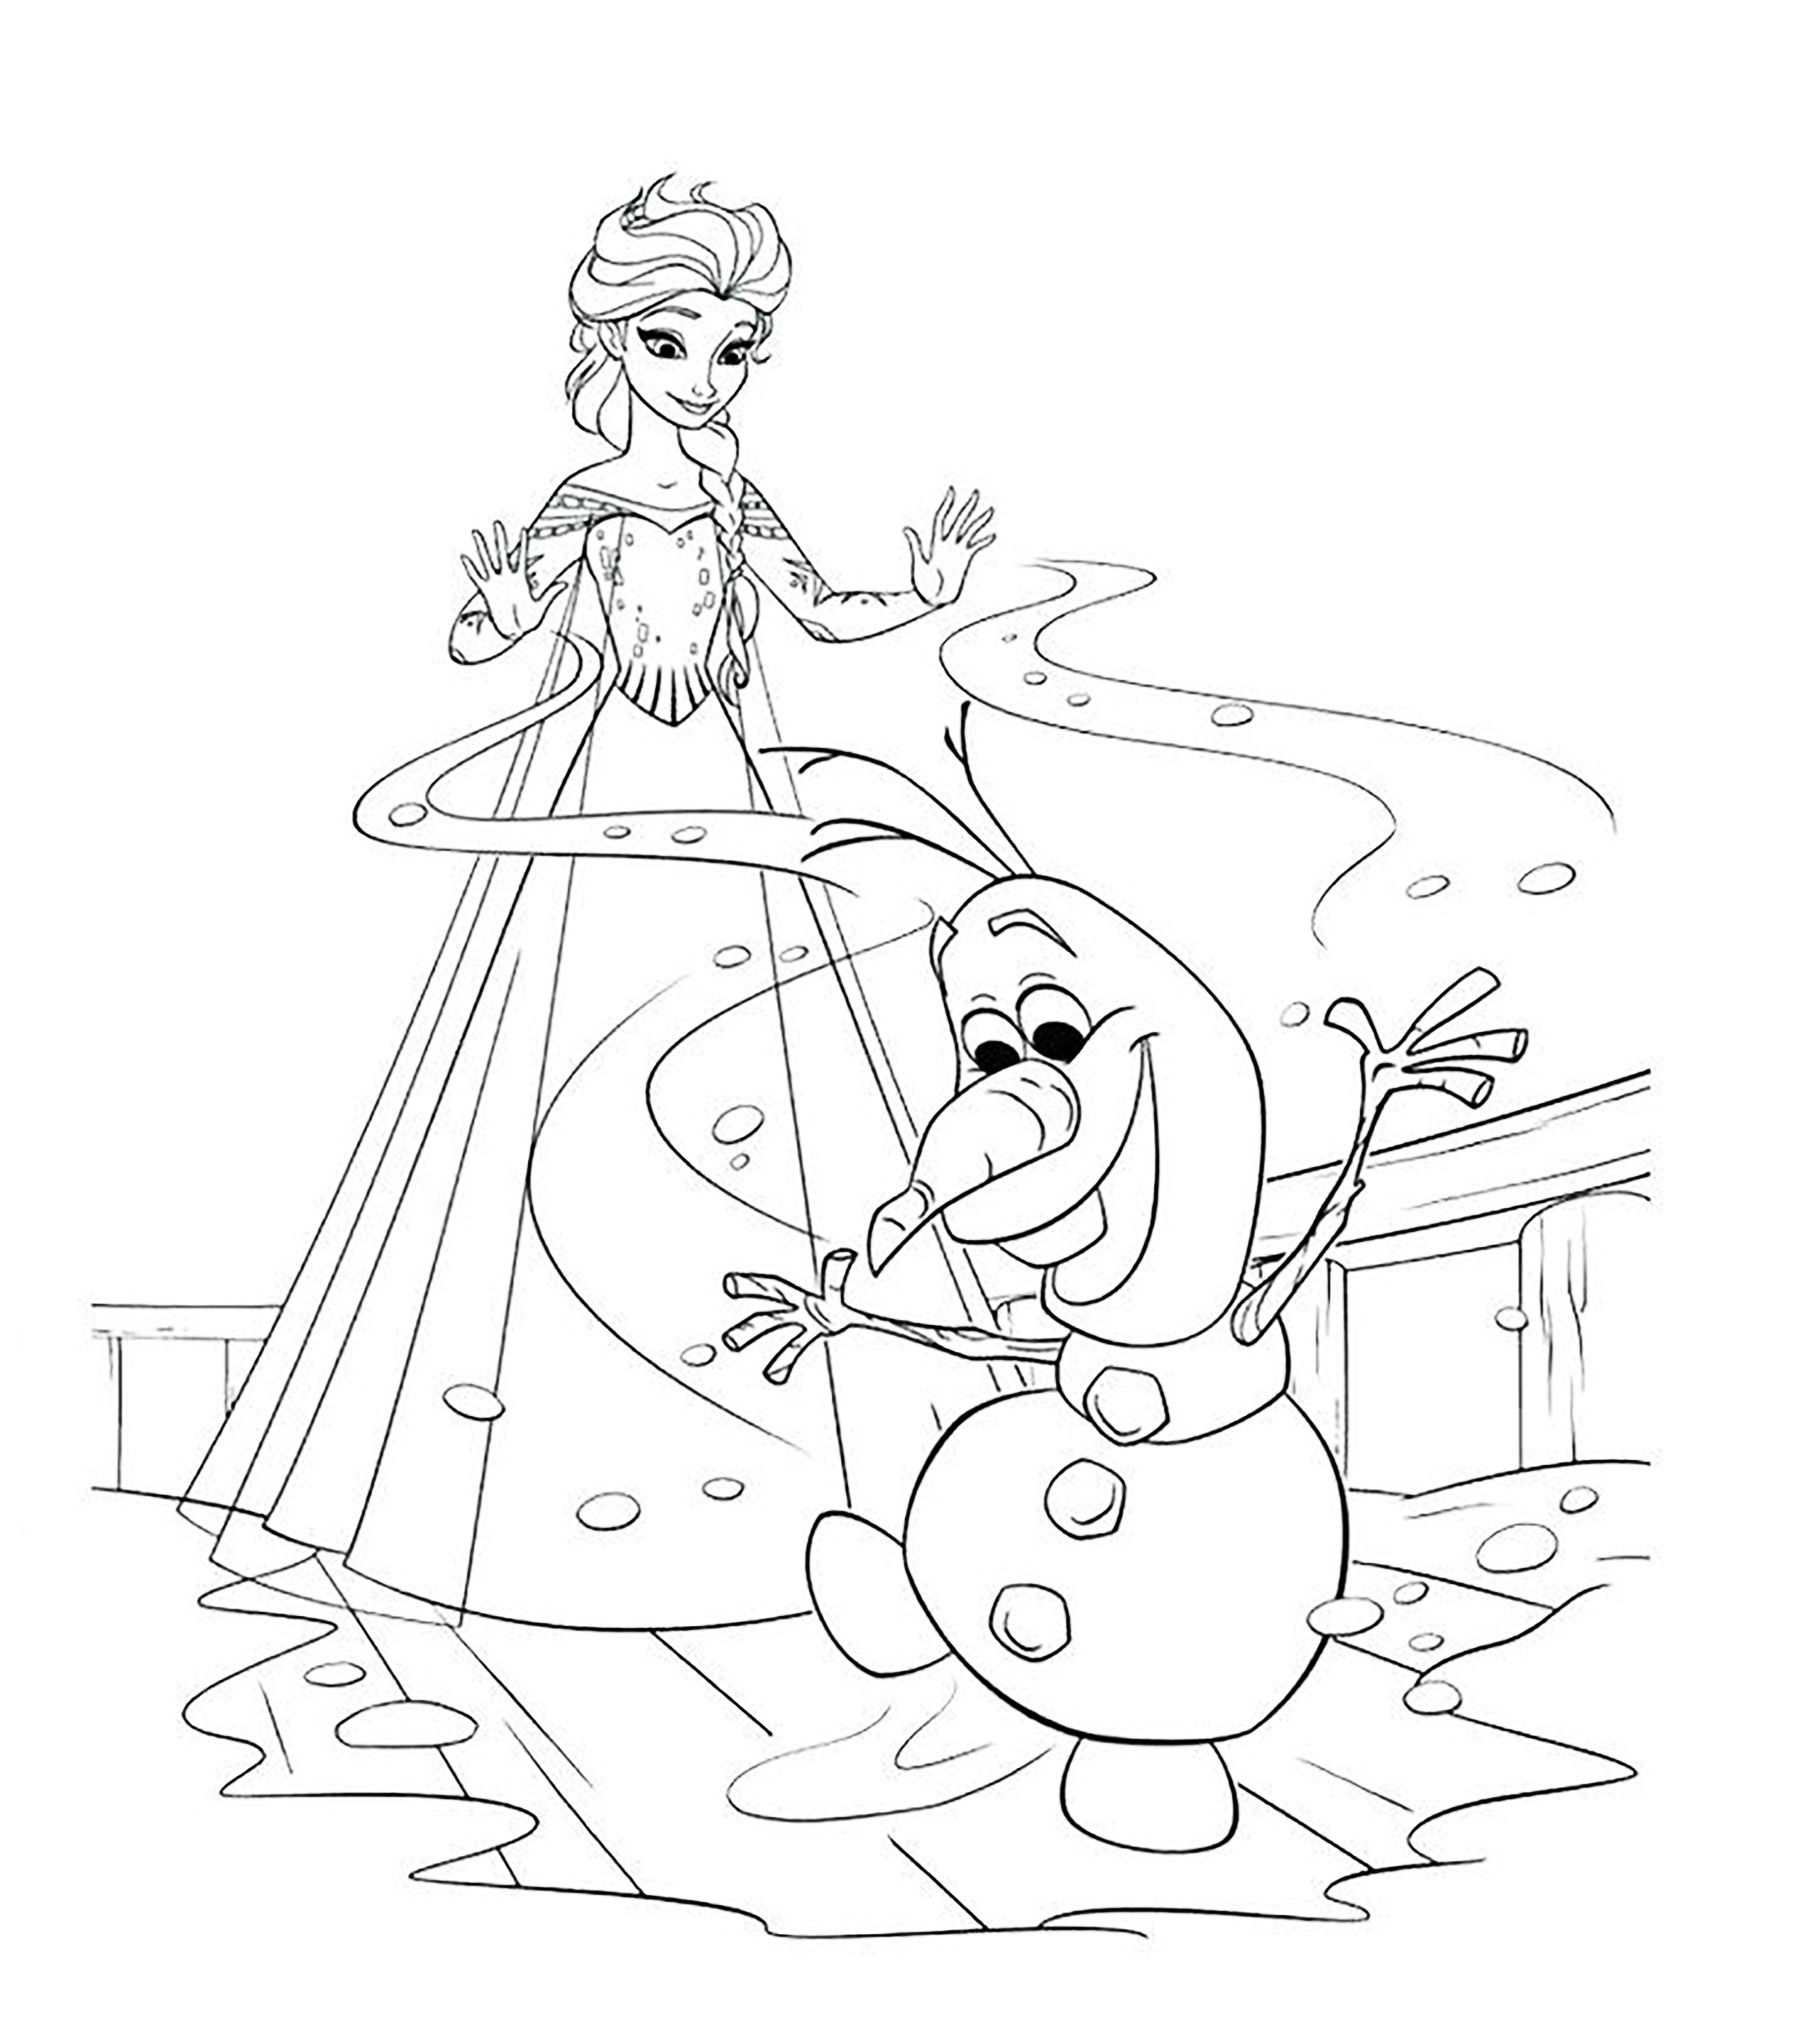 frozen-free-to-color-for-children-frozen-kids-coloring-pages